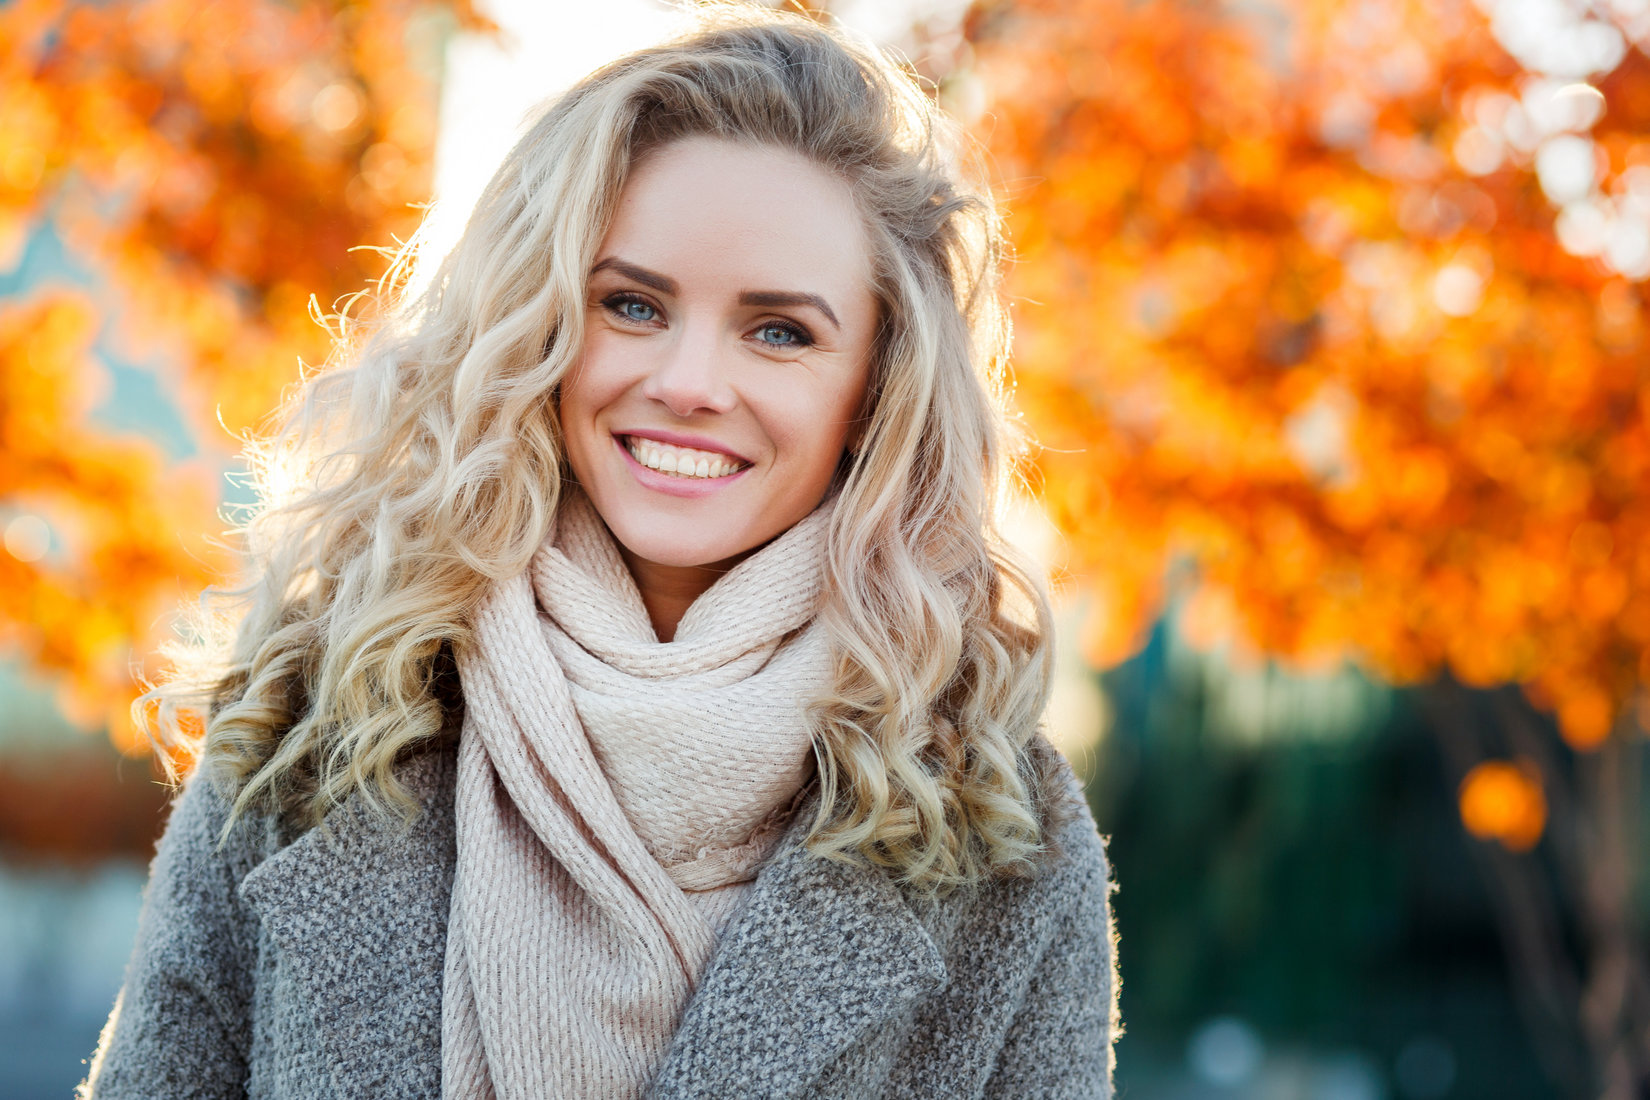 beautiful-smiling-blond-woman-with-curly-hair-and-blue-eyes-ok-dental